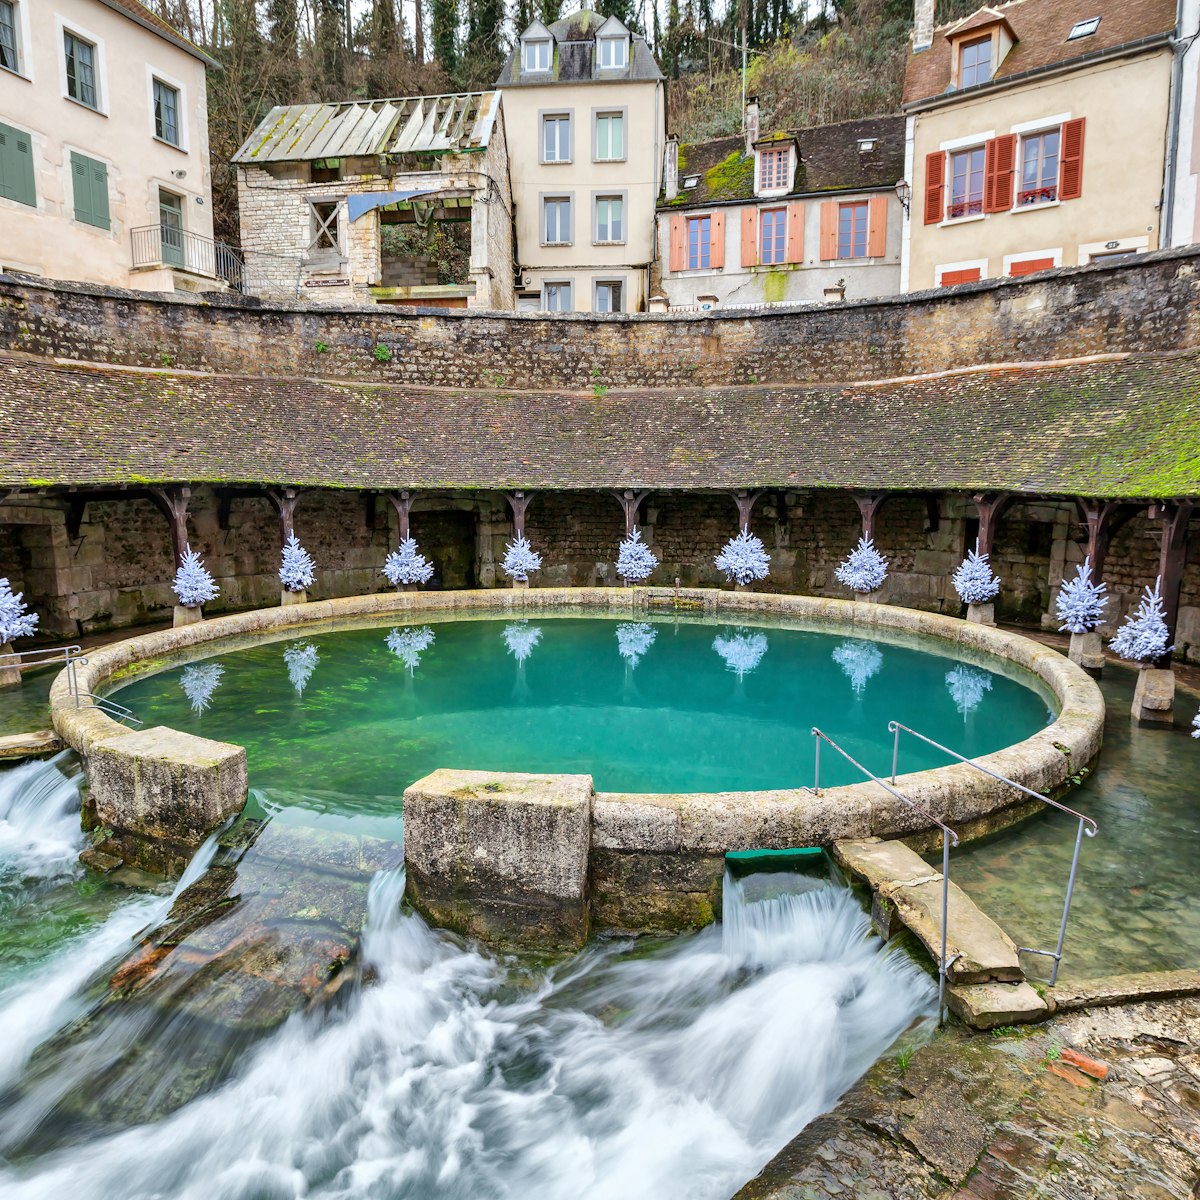 Fosse Dionne - the karst spring located in the center of Tonnerre, France.